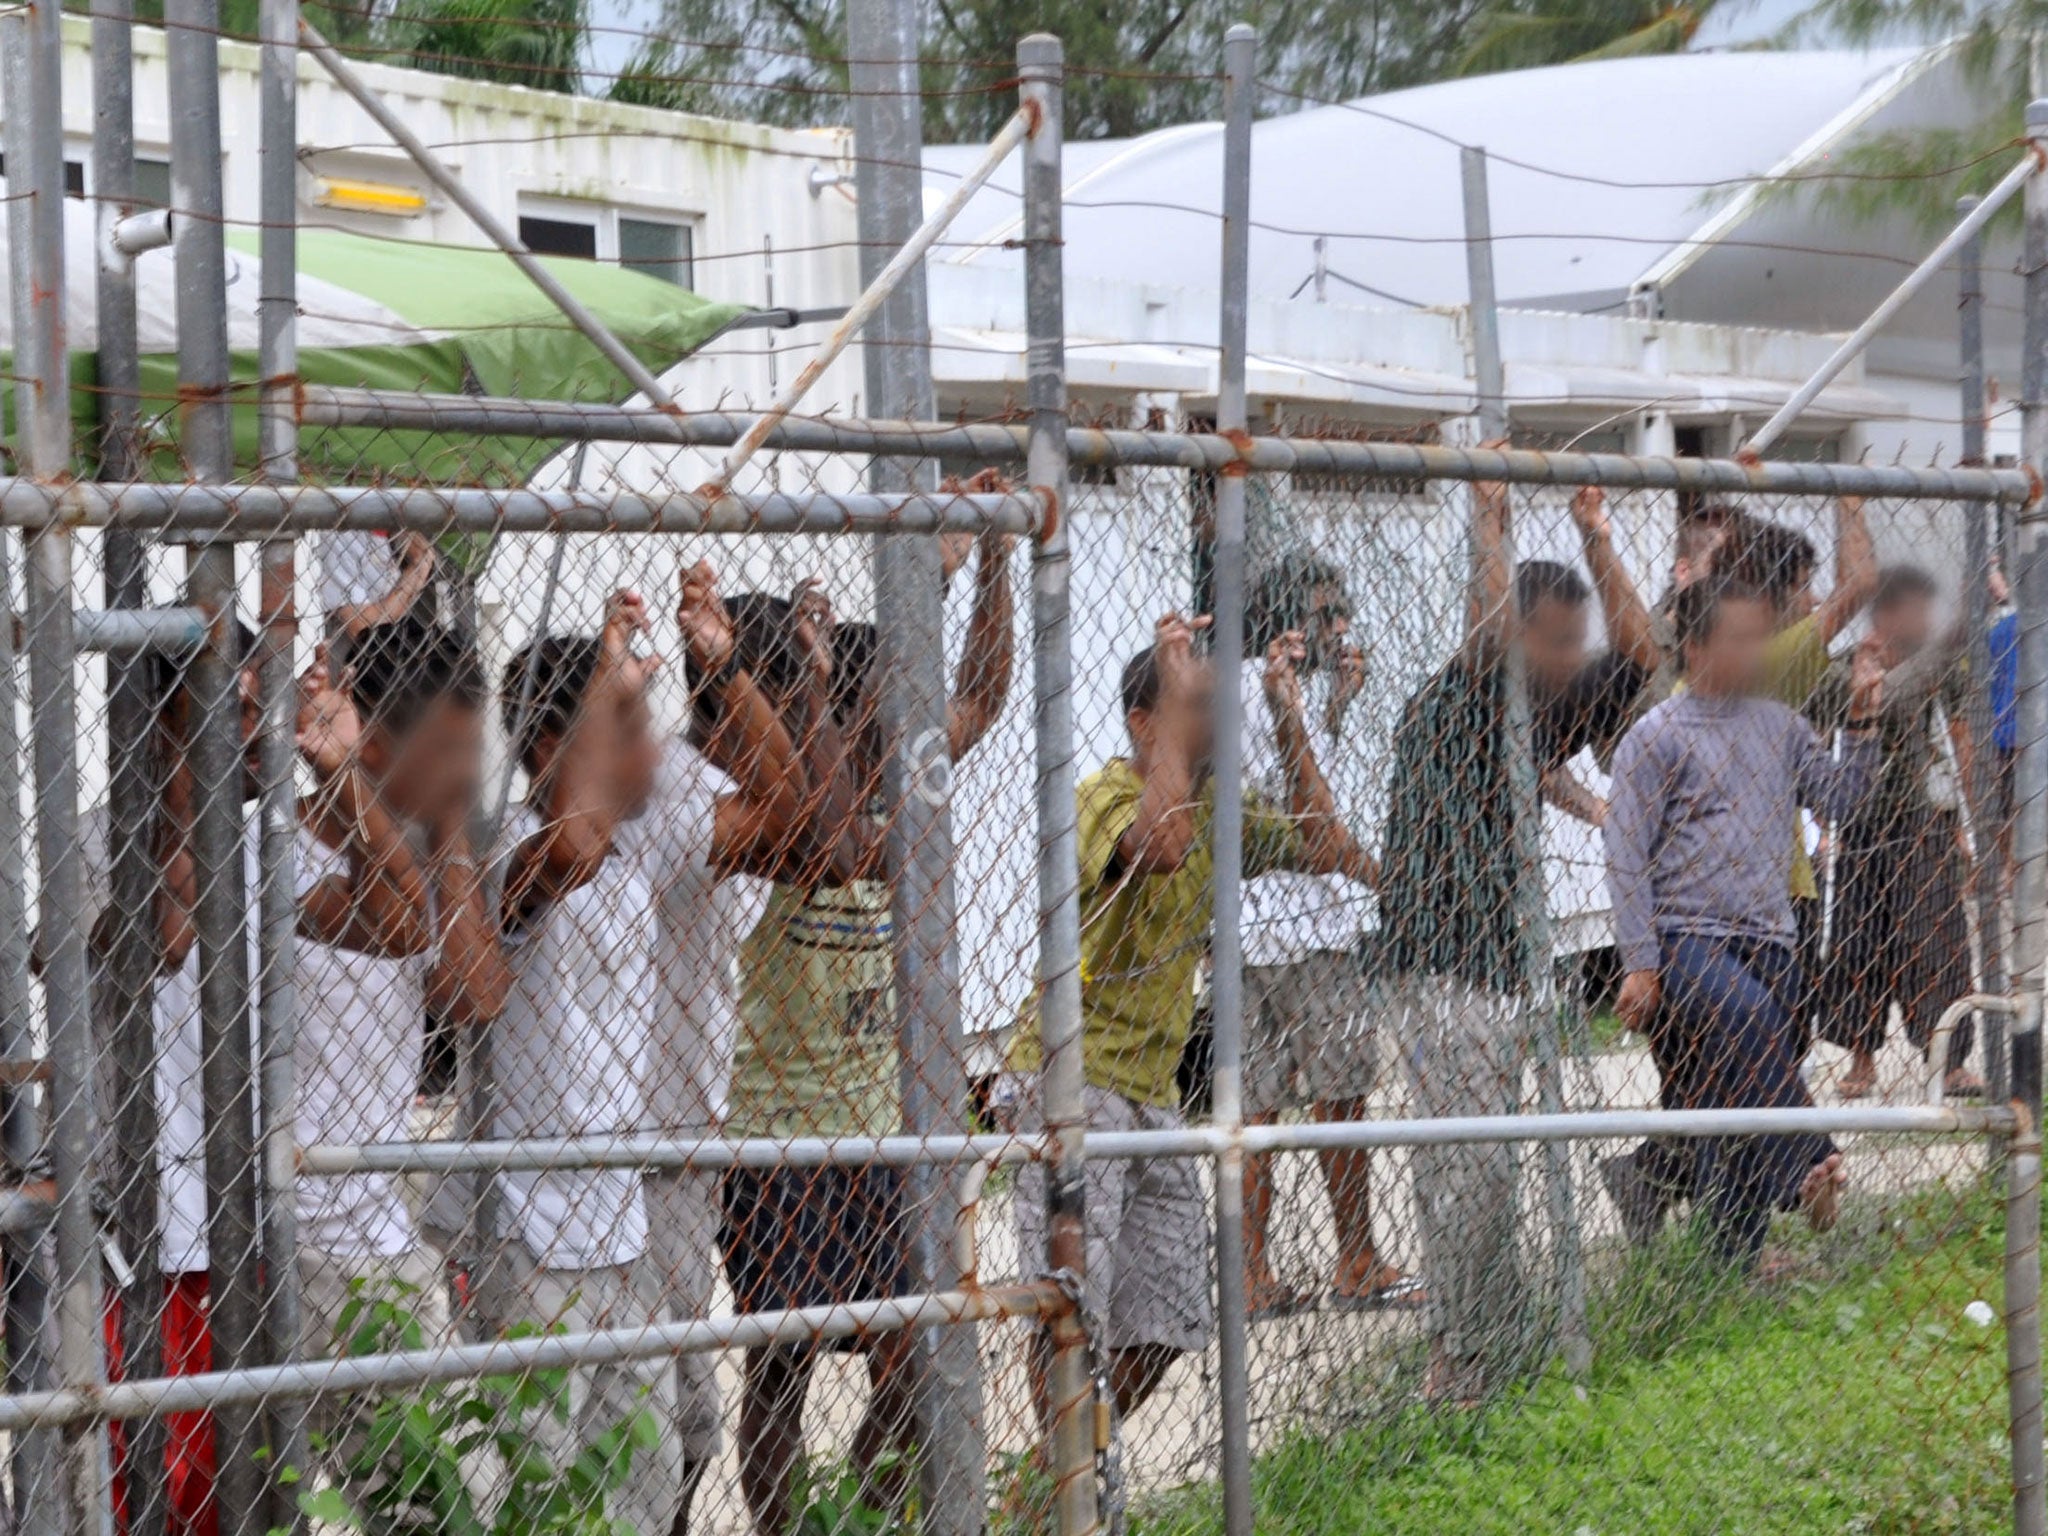 File photo of refugees in an Australian detention centre on Manus Island. Mr Trump's order could place 1,000 people there in limbo once again